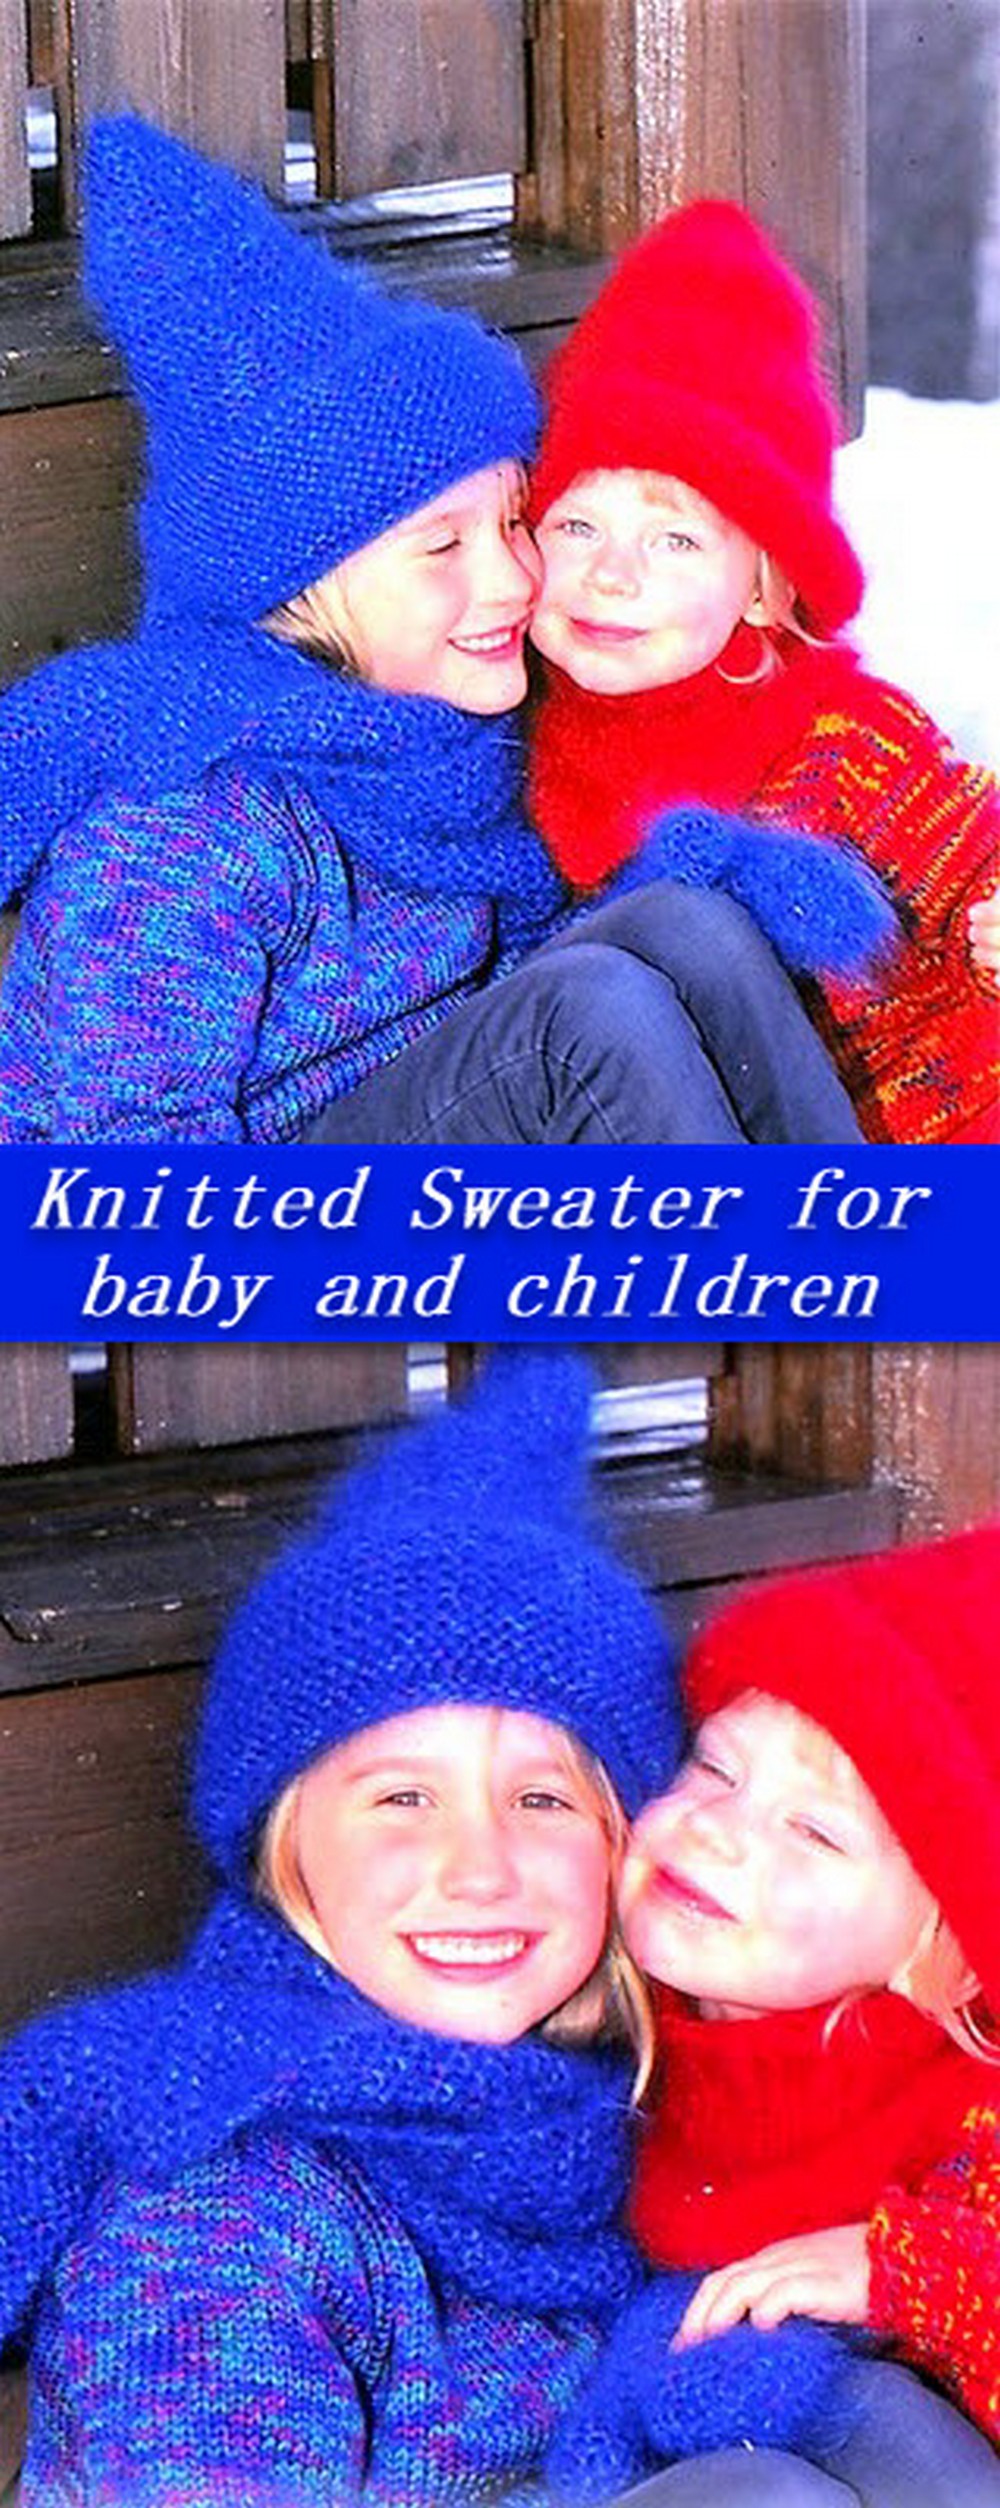 Knitted Crochet Sweater For Baby And Children